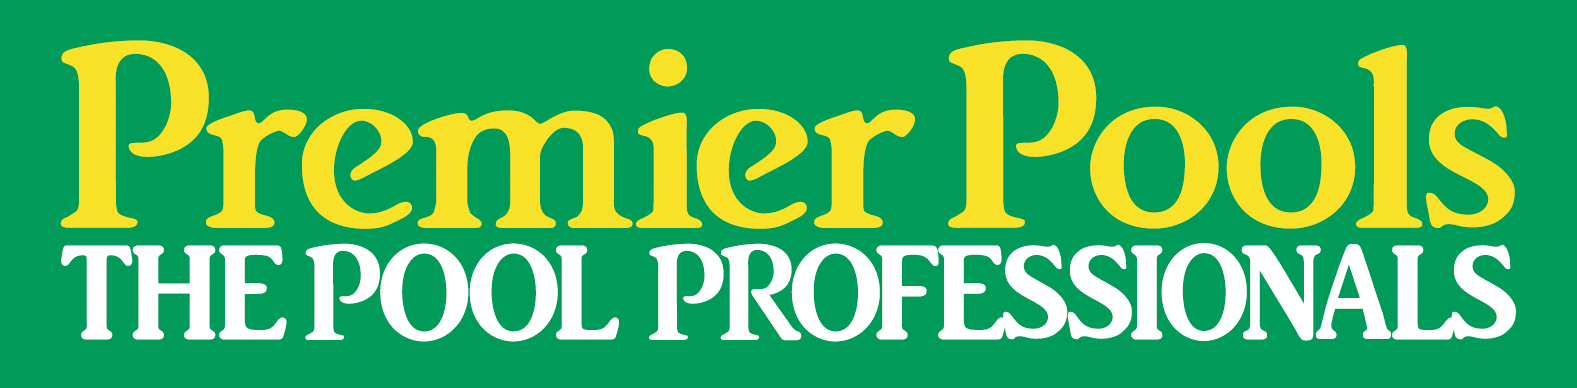 Thanks to Premier Pools - LLV supporter